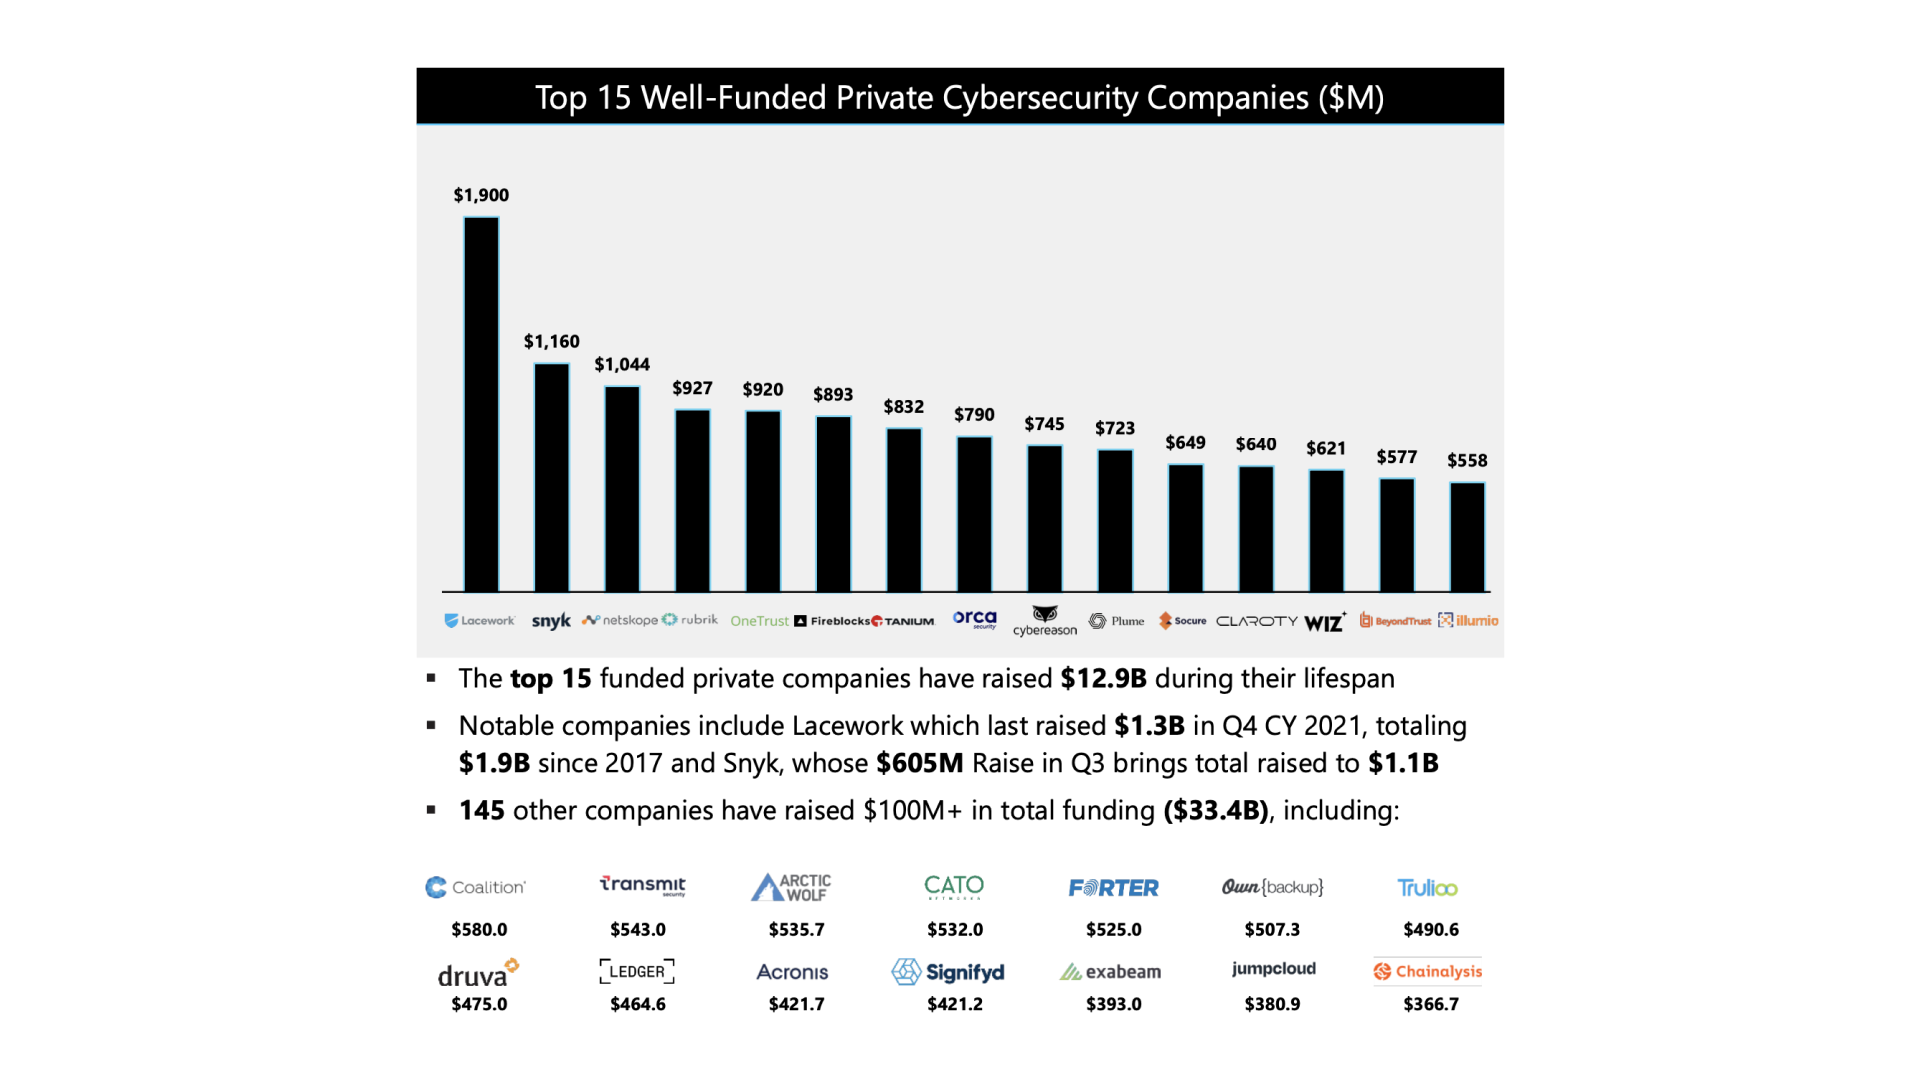 Top fifteen well-funded private cybersecurity companies.